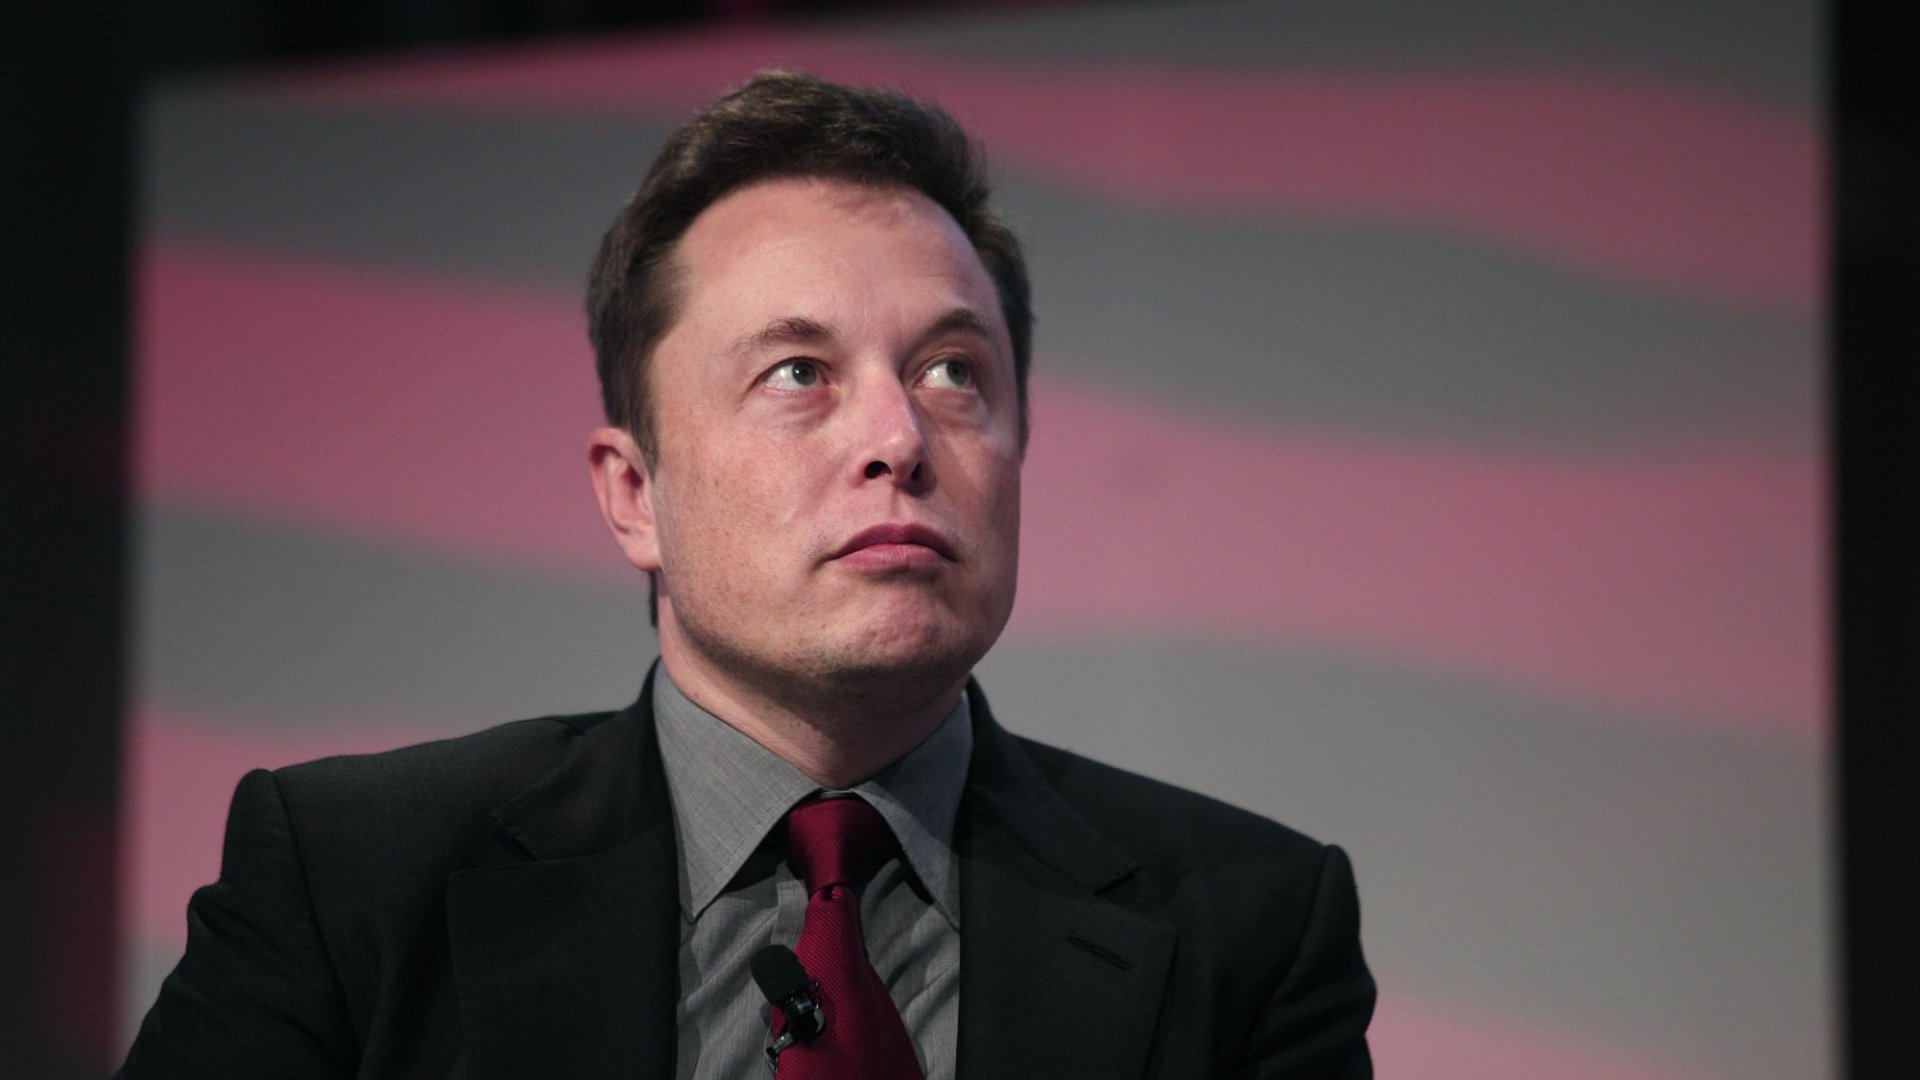 Elon Musk claimed that diplomats intend to continue the war